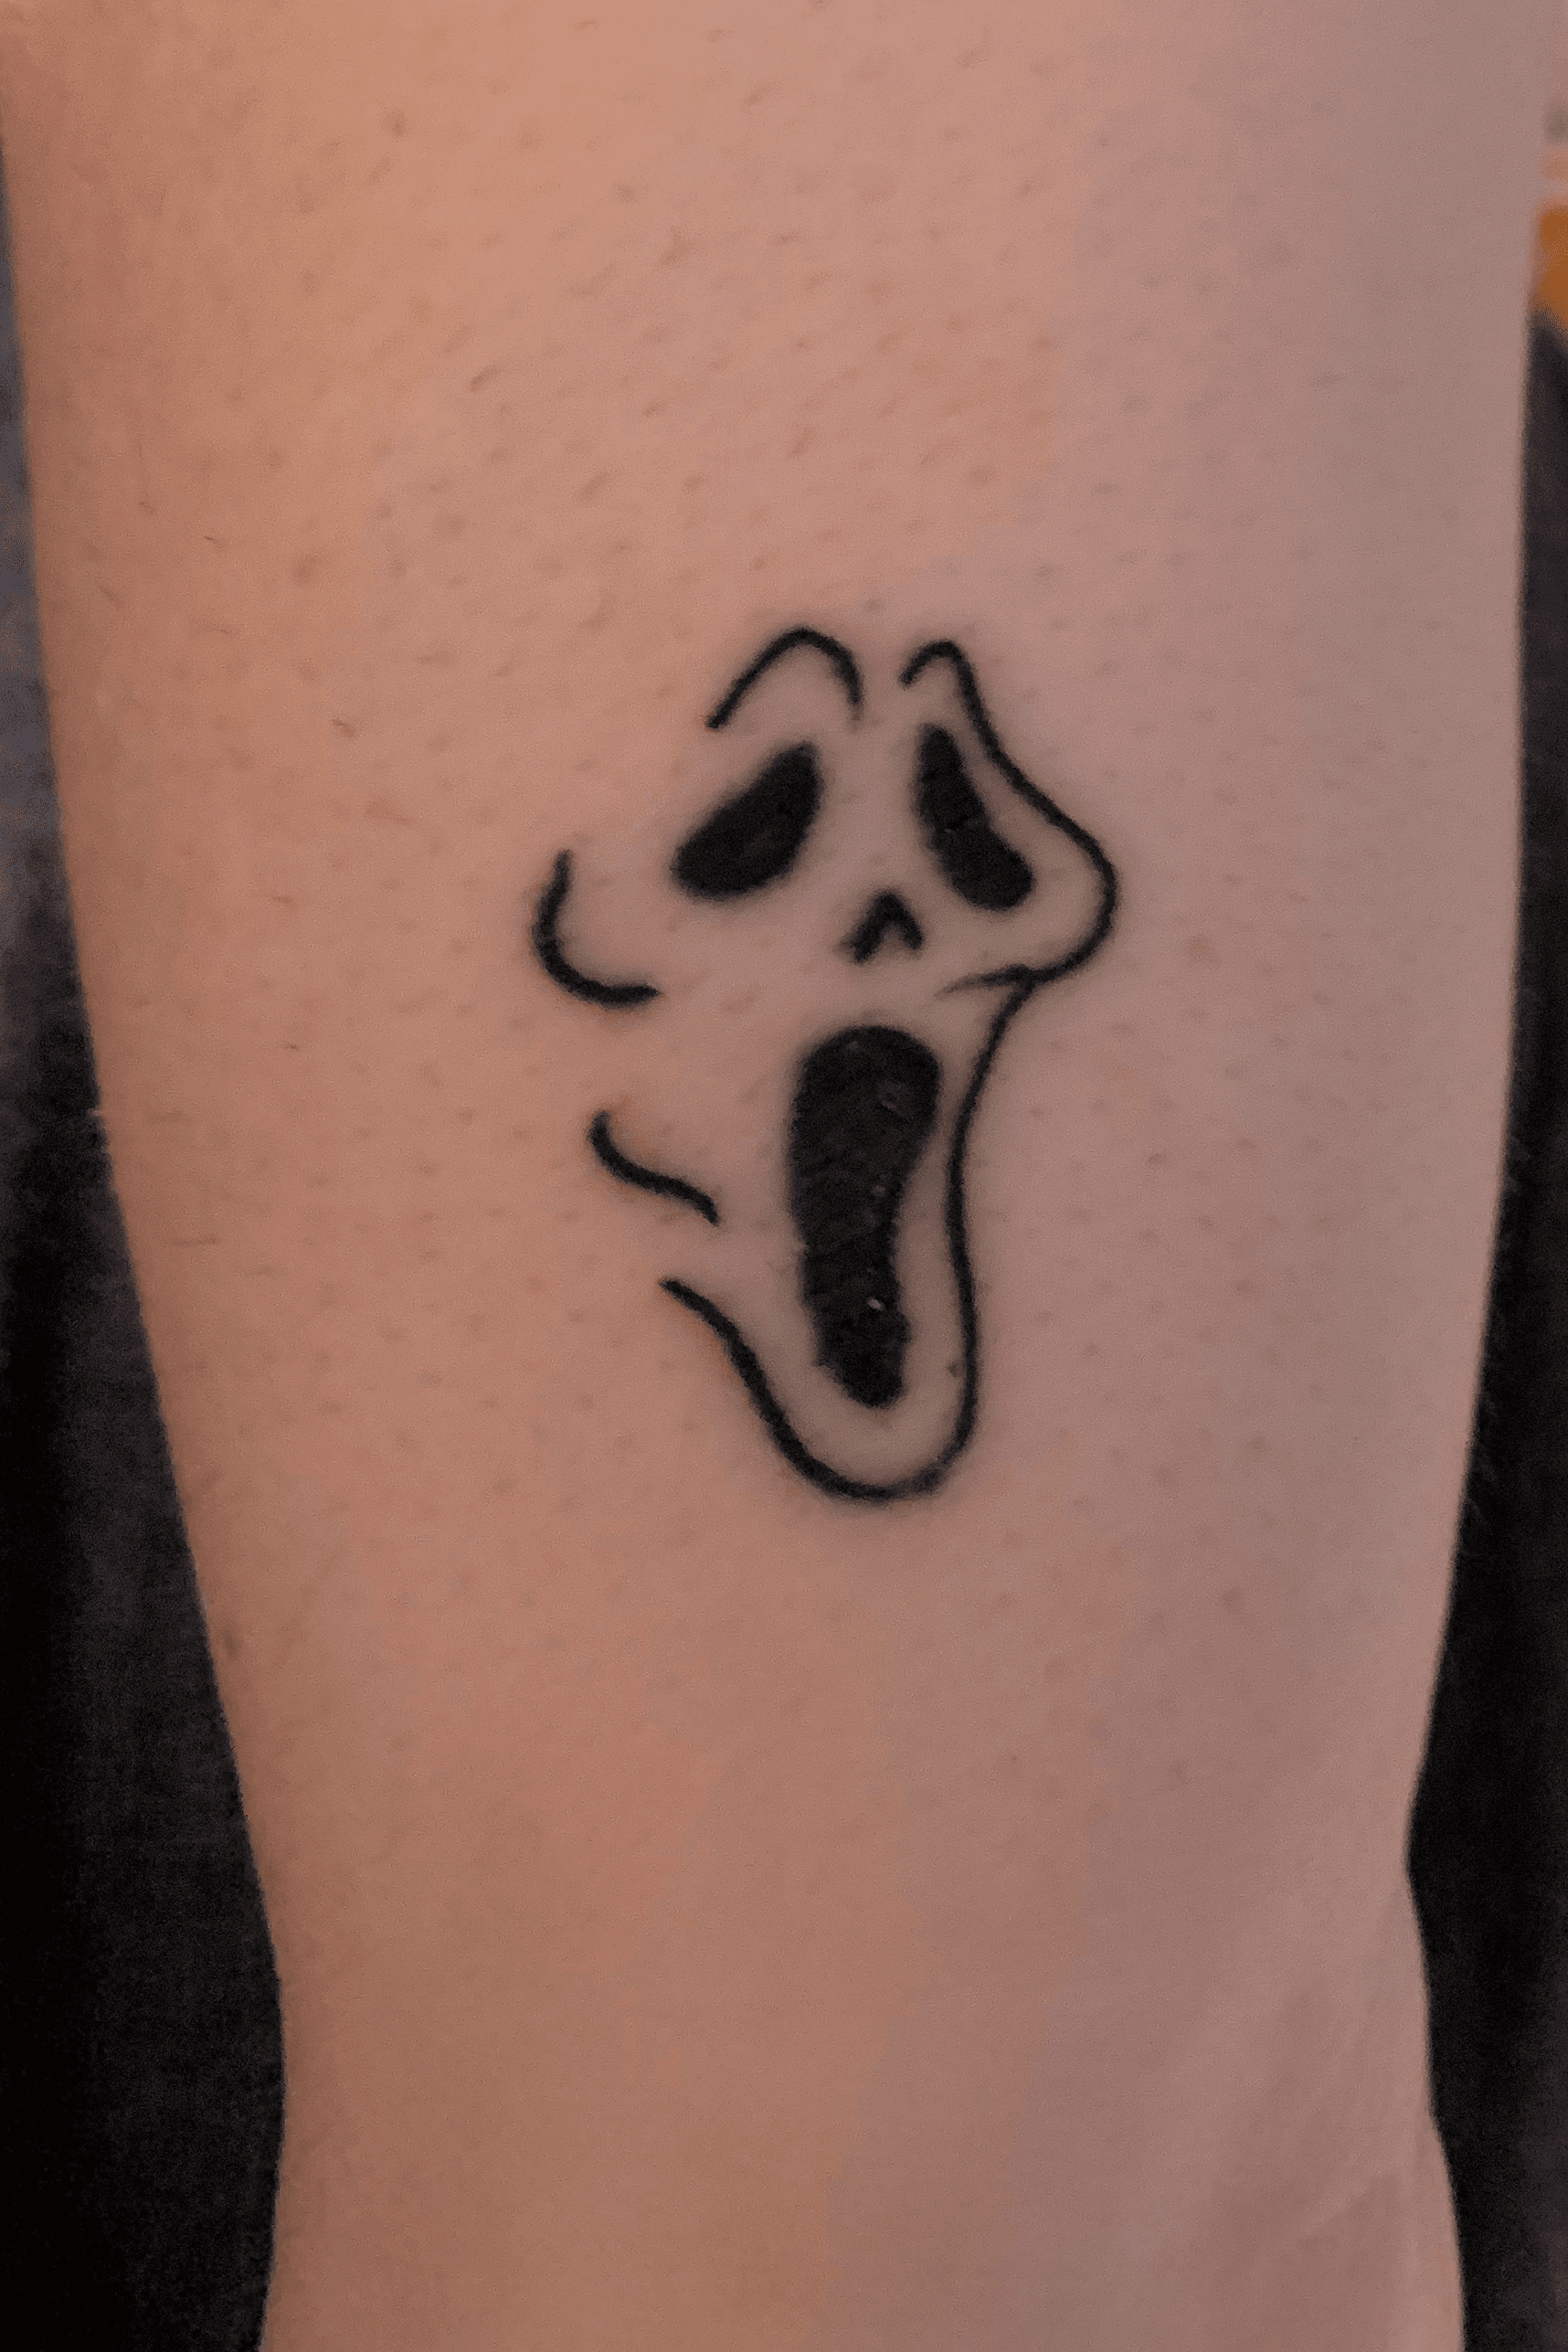 Infamous Tattoo Studio  Scream ghost face tattoo by Taylor Hoang  Facebook